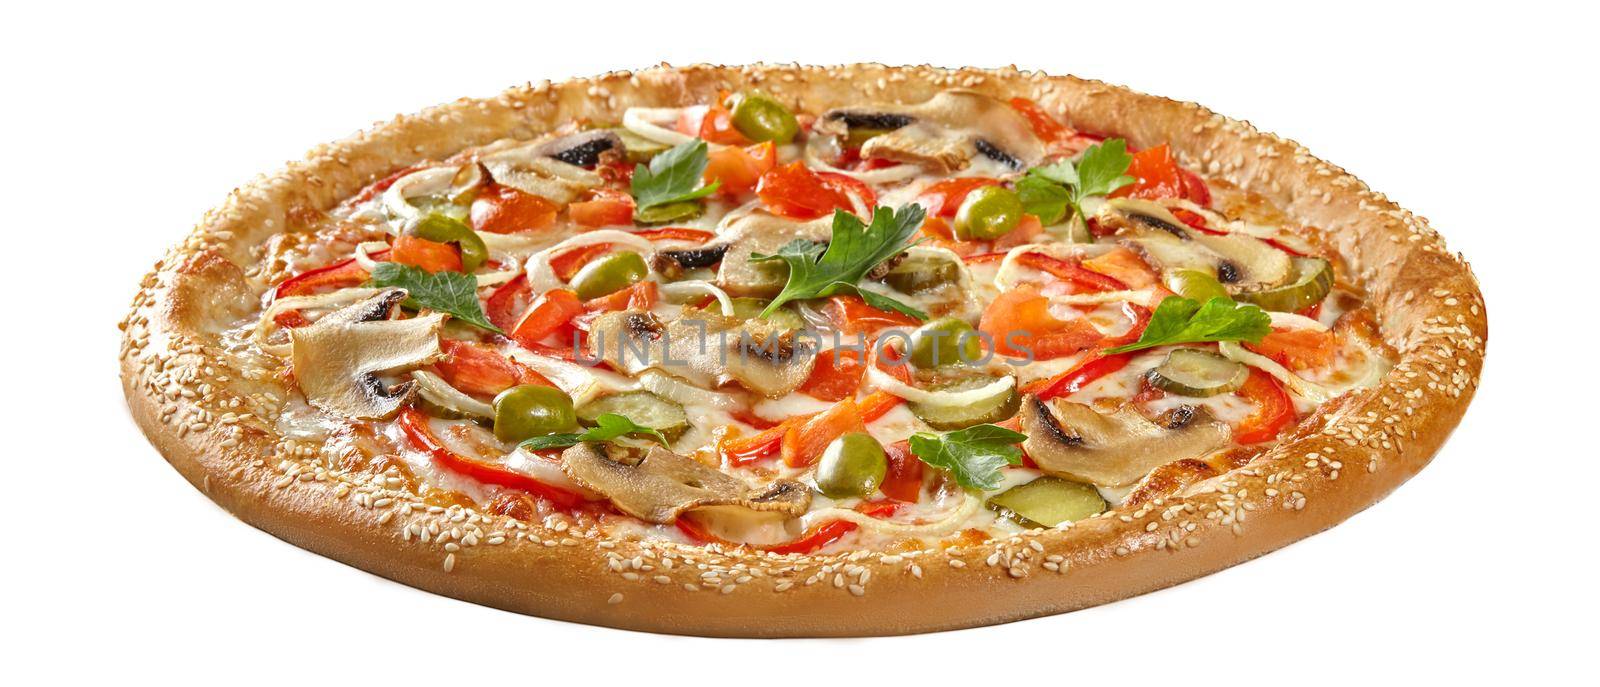 Closeup of tasty pizza with browned edge sprinkled with sesame, mushrooms, pickles, ripe tomatoes, bell peppers, onions and olives garnished with fresh parsley on cheese sauce isolated on white